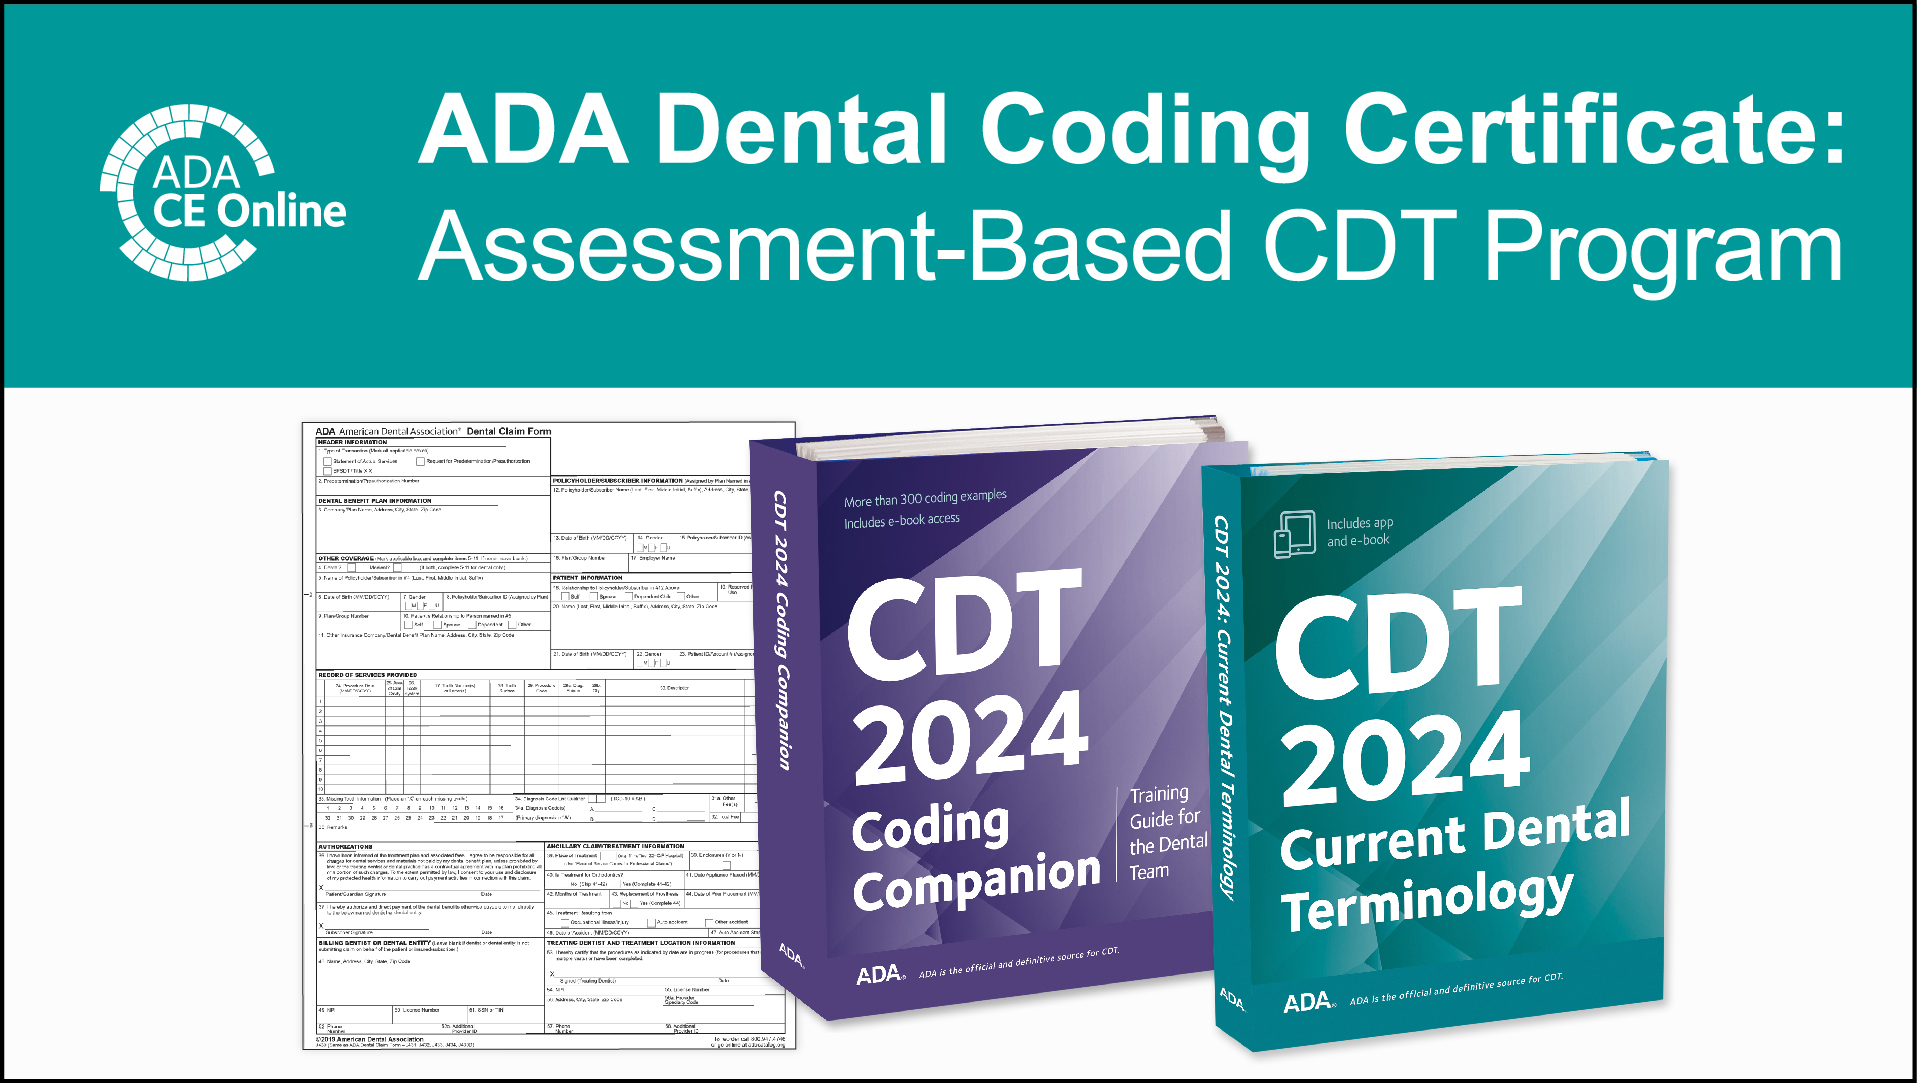 Showing the ADA Dental Coding Certificate